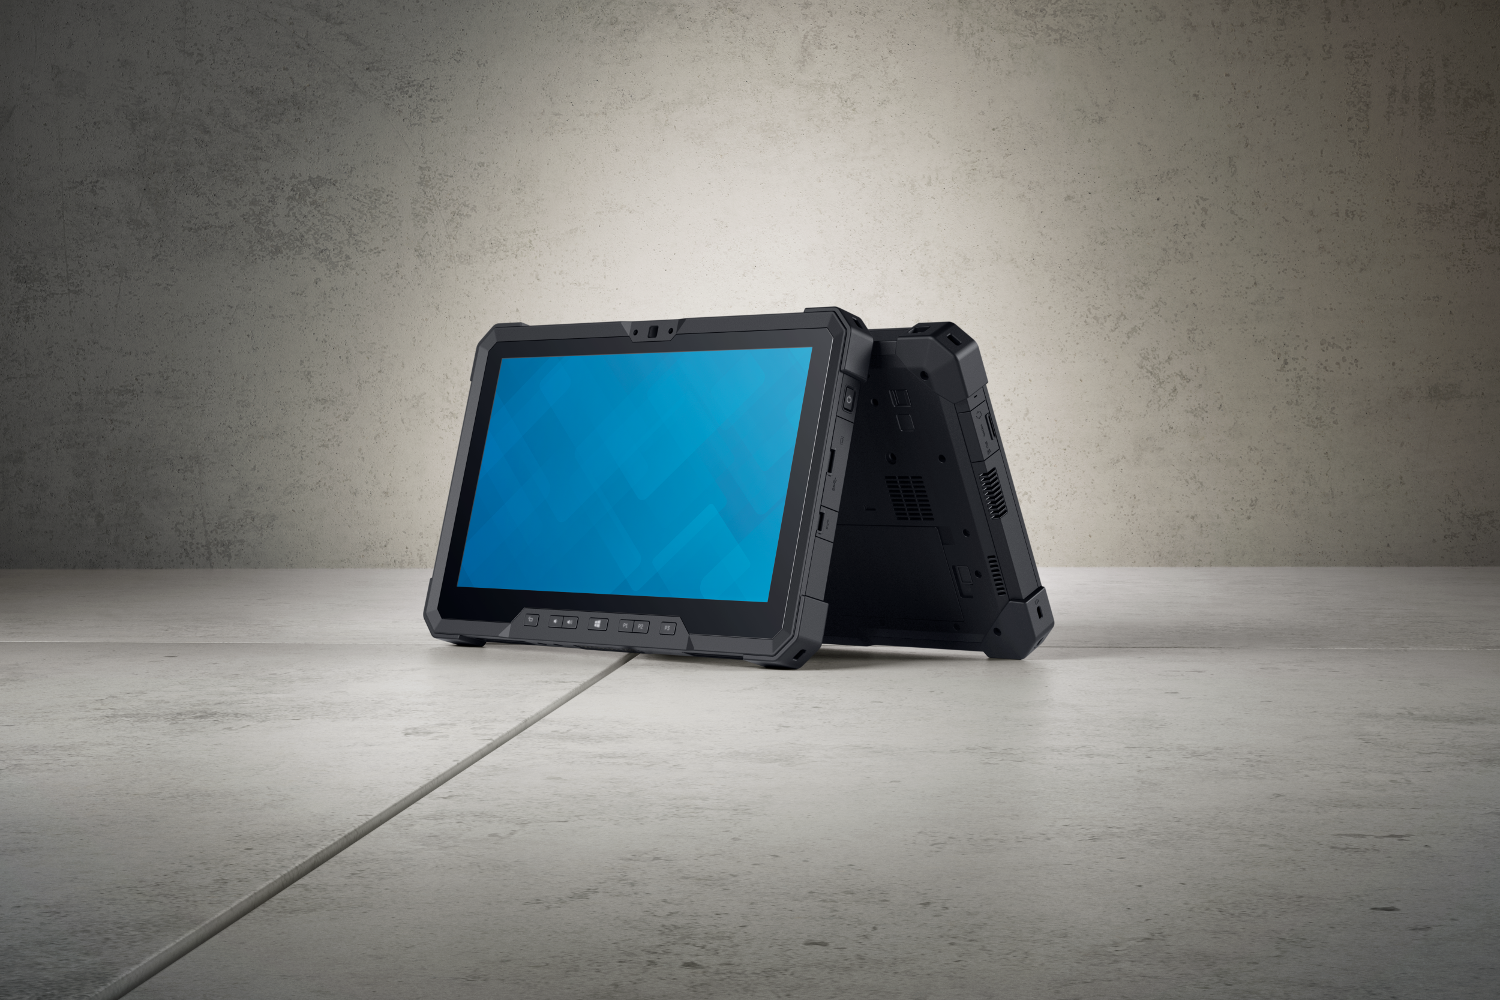 tough stuff dells new latitude 12 rugged tablet is the right tool for any job studio 3